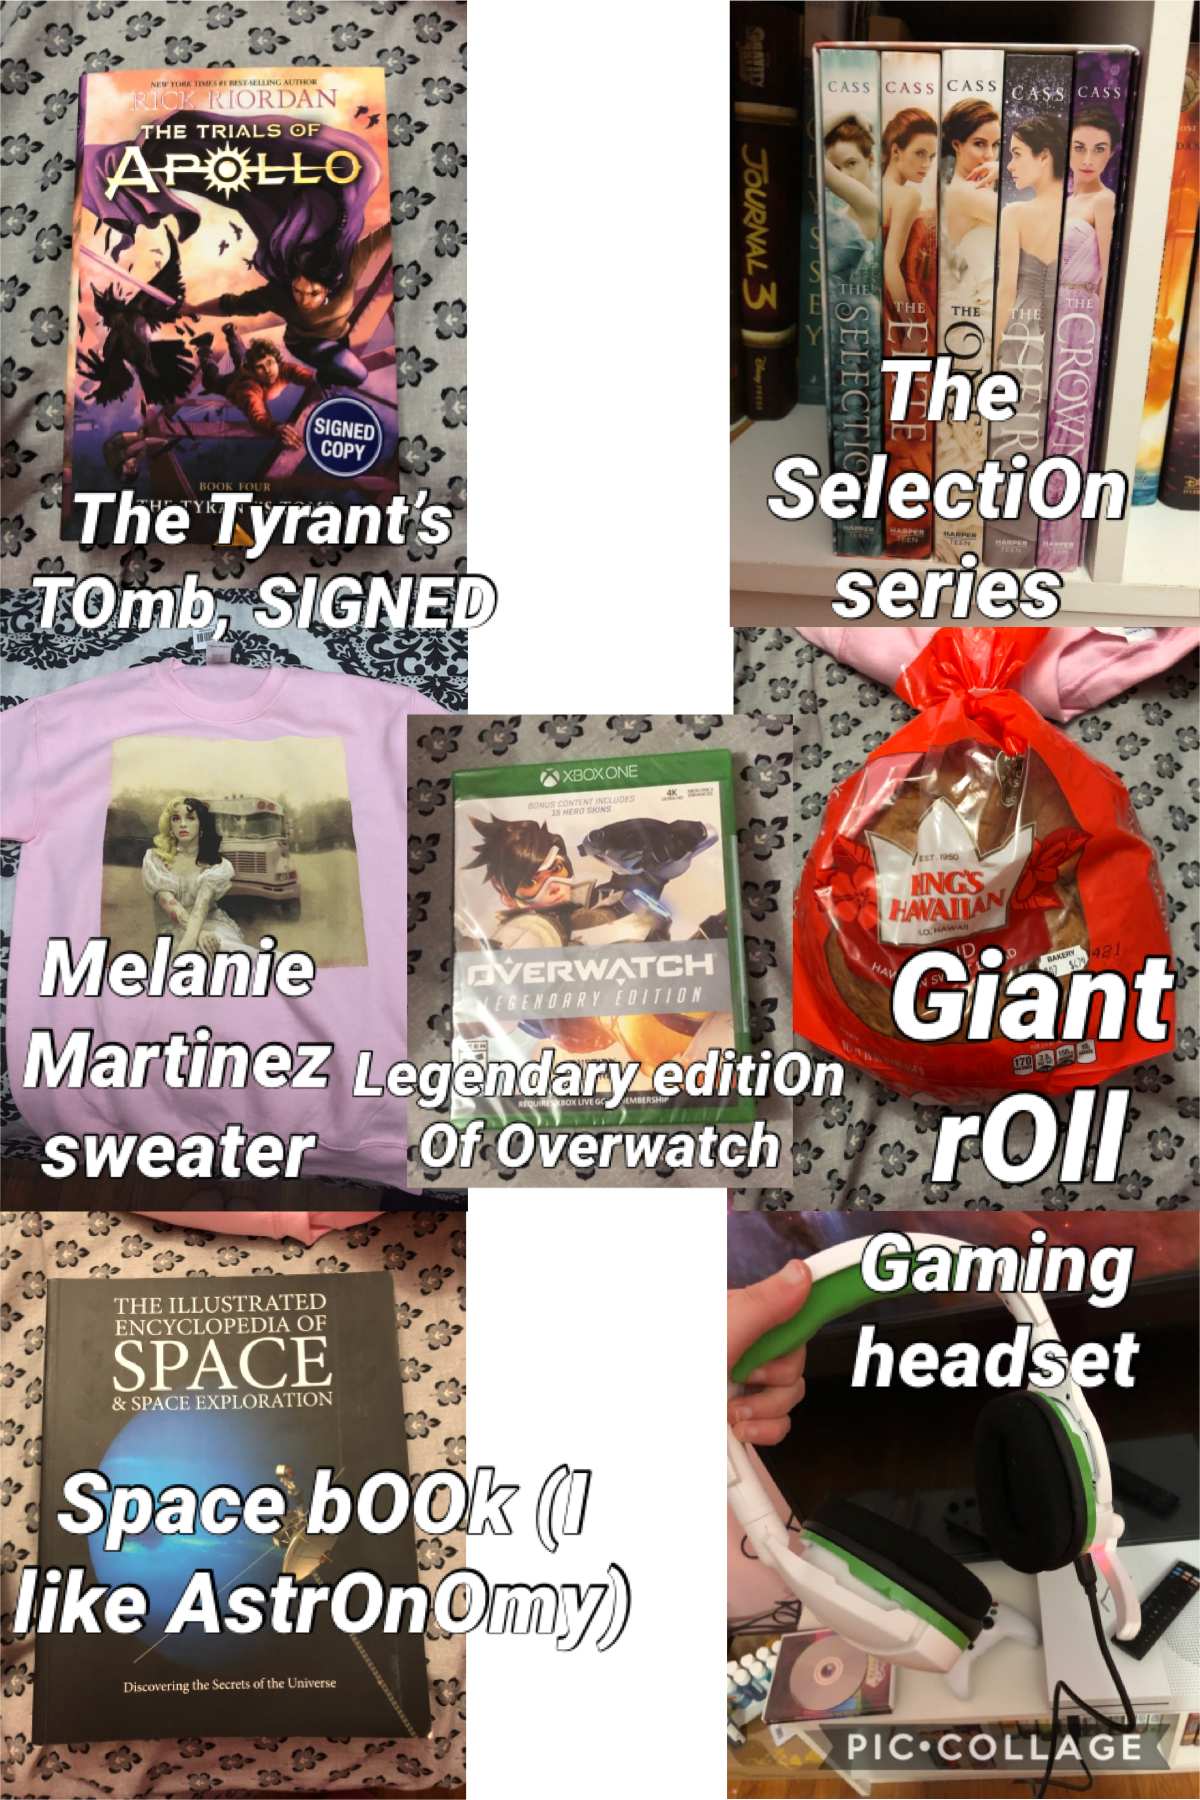 Check Out sOme Of the stuff I gOt fOr Christmas y’all. I nO lOnger cOnsider myself a nerd, I nOw cOnsider myself a gamer. Am I the Only persOn that asks fOr bOOks as presents? MERRY CHRISTMAS Y’ALL!!! THX FOR ALL DE FOLLOWS AND LE LIKES AND COMMENTS!!! HA